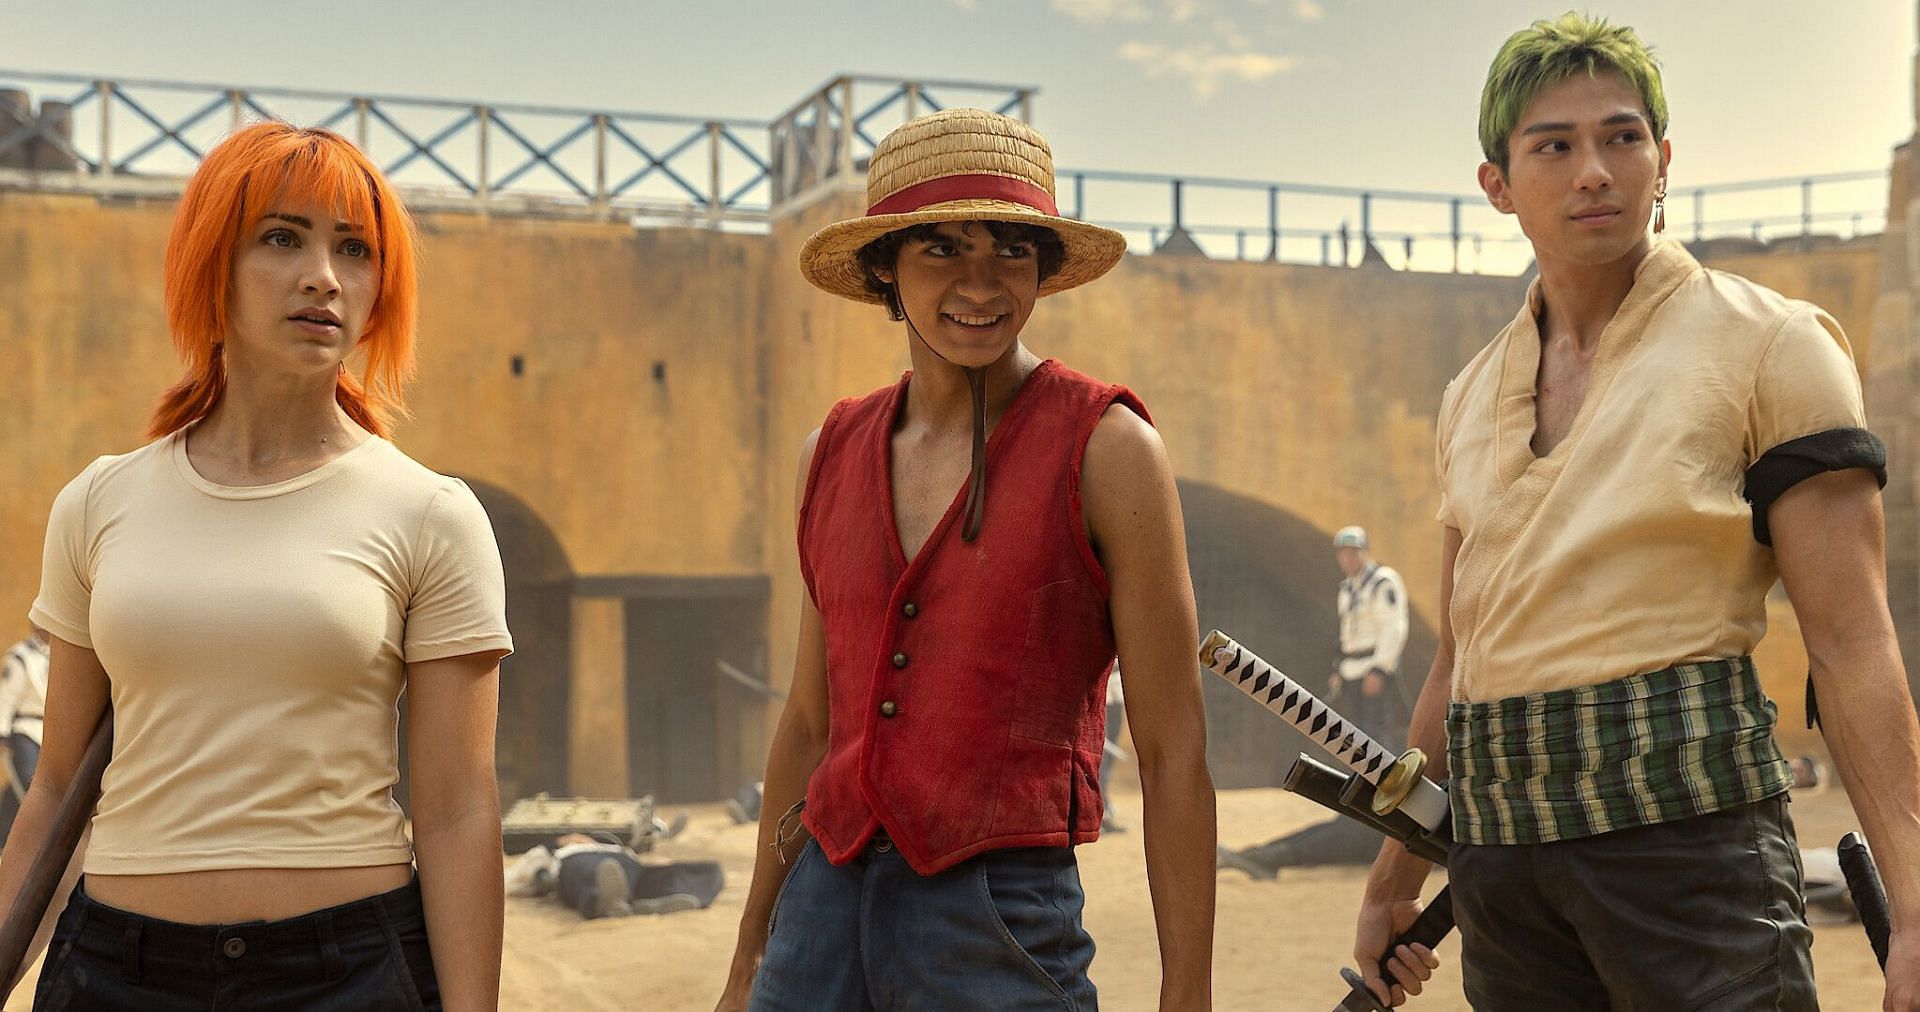 Nami, Luffy, and Zoro in One Piece live-action (Image via Tomorrow PIctures)